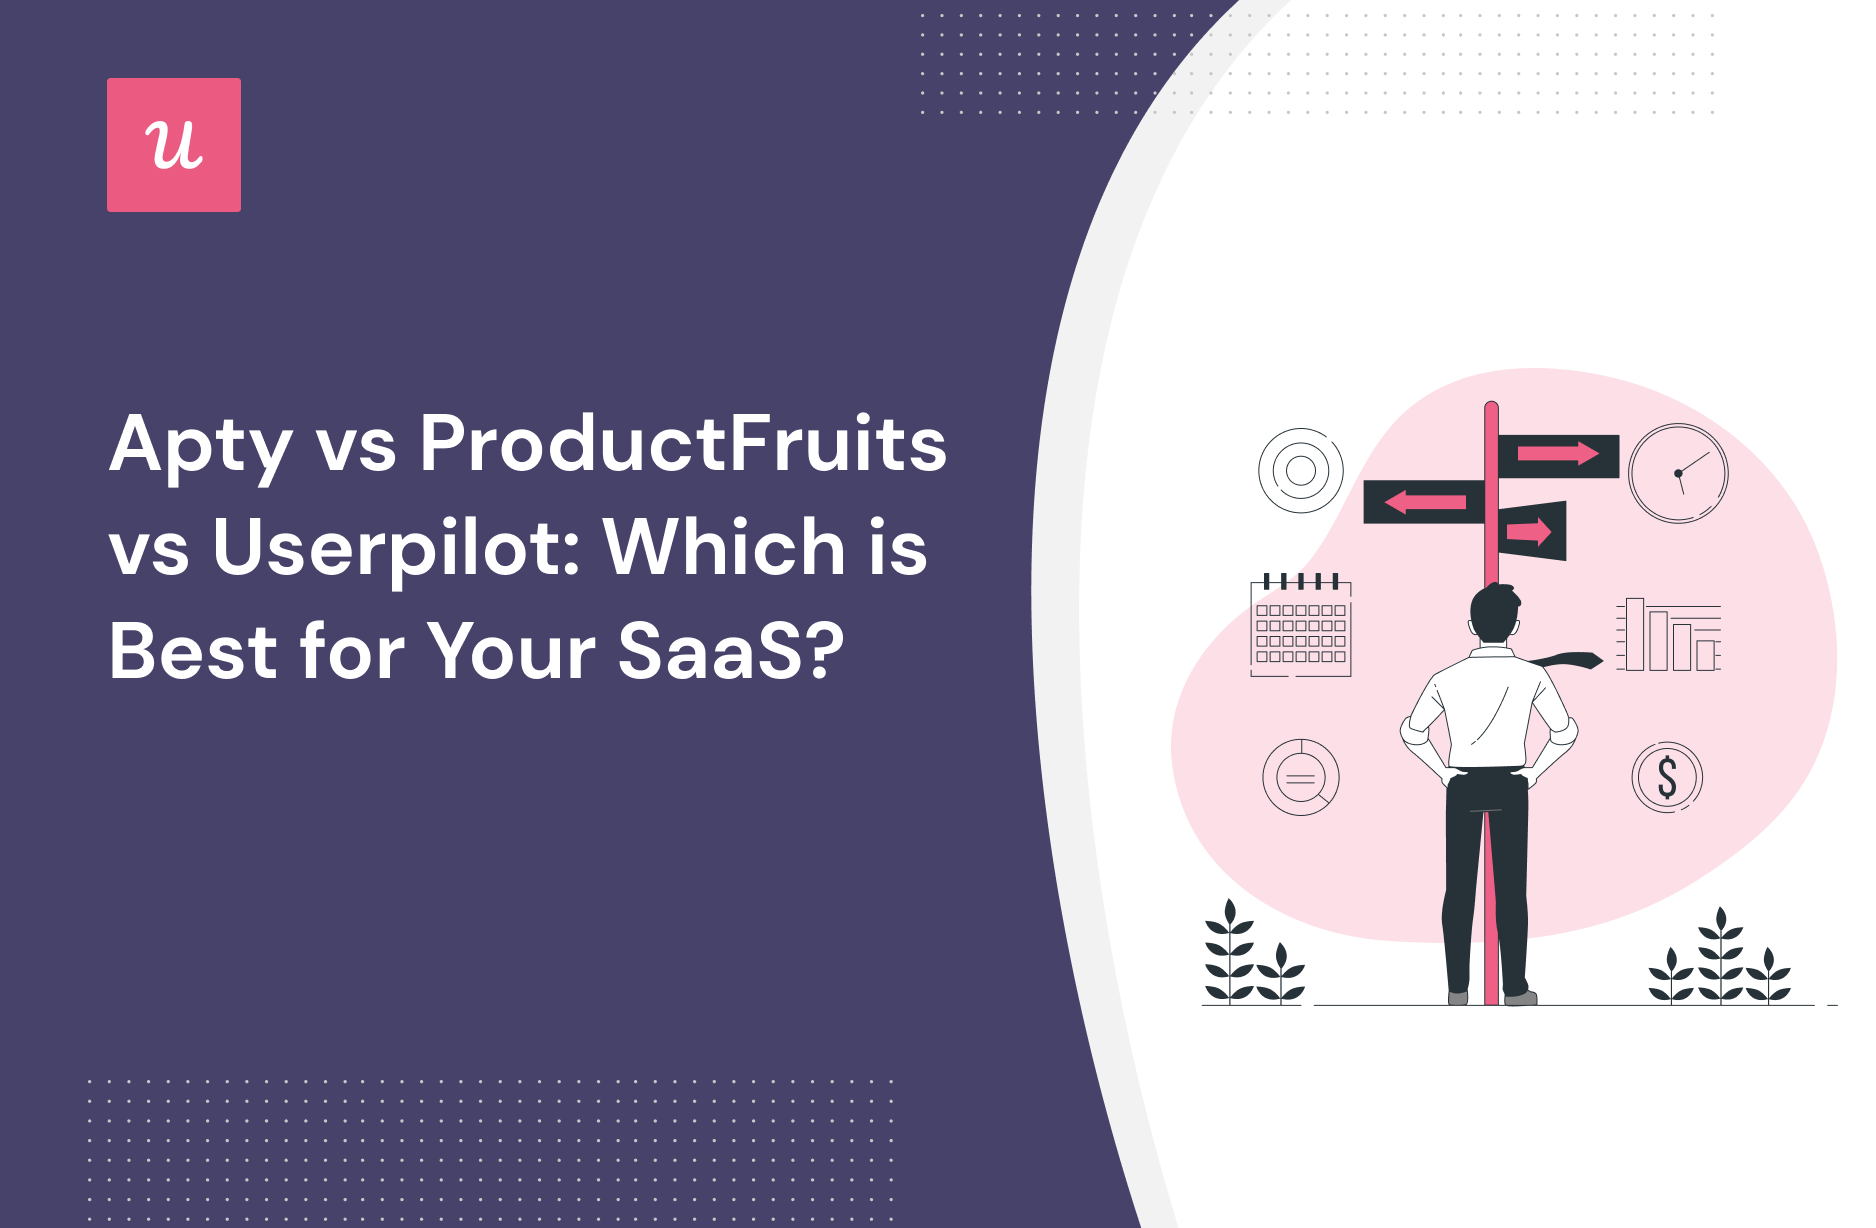 Apty vs ProductFruits vs Userpilot: Which is Best for Your SaaS?